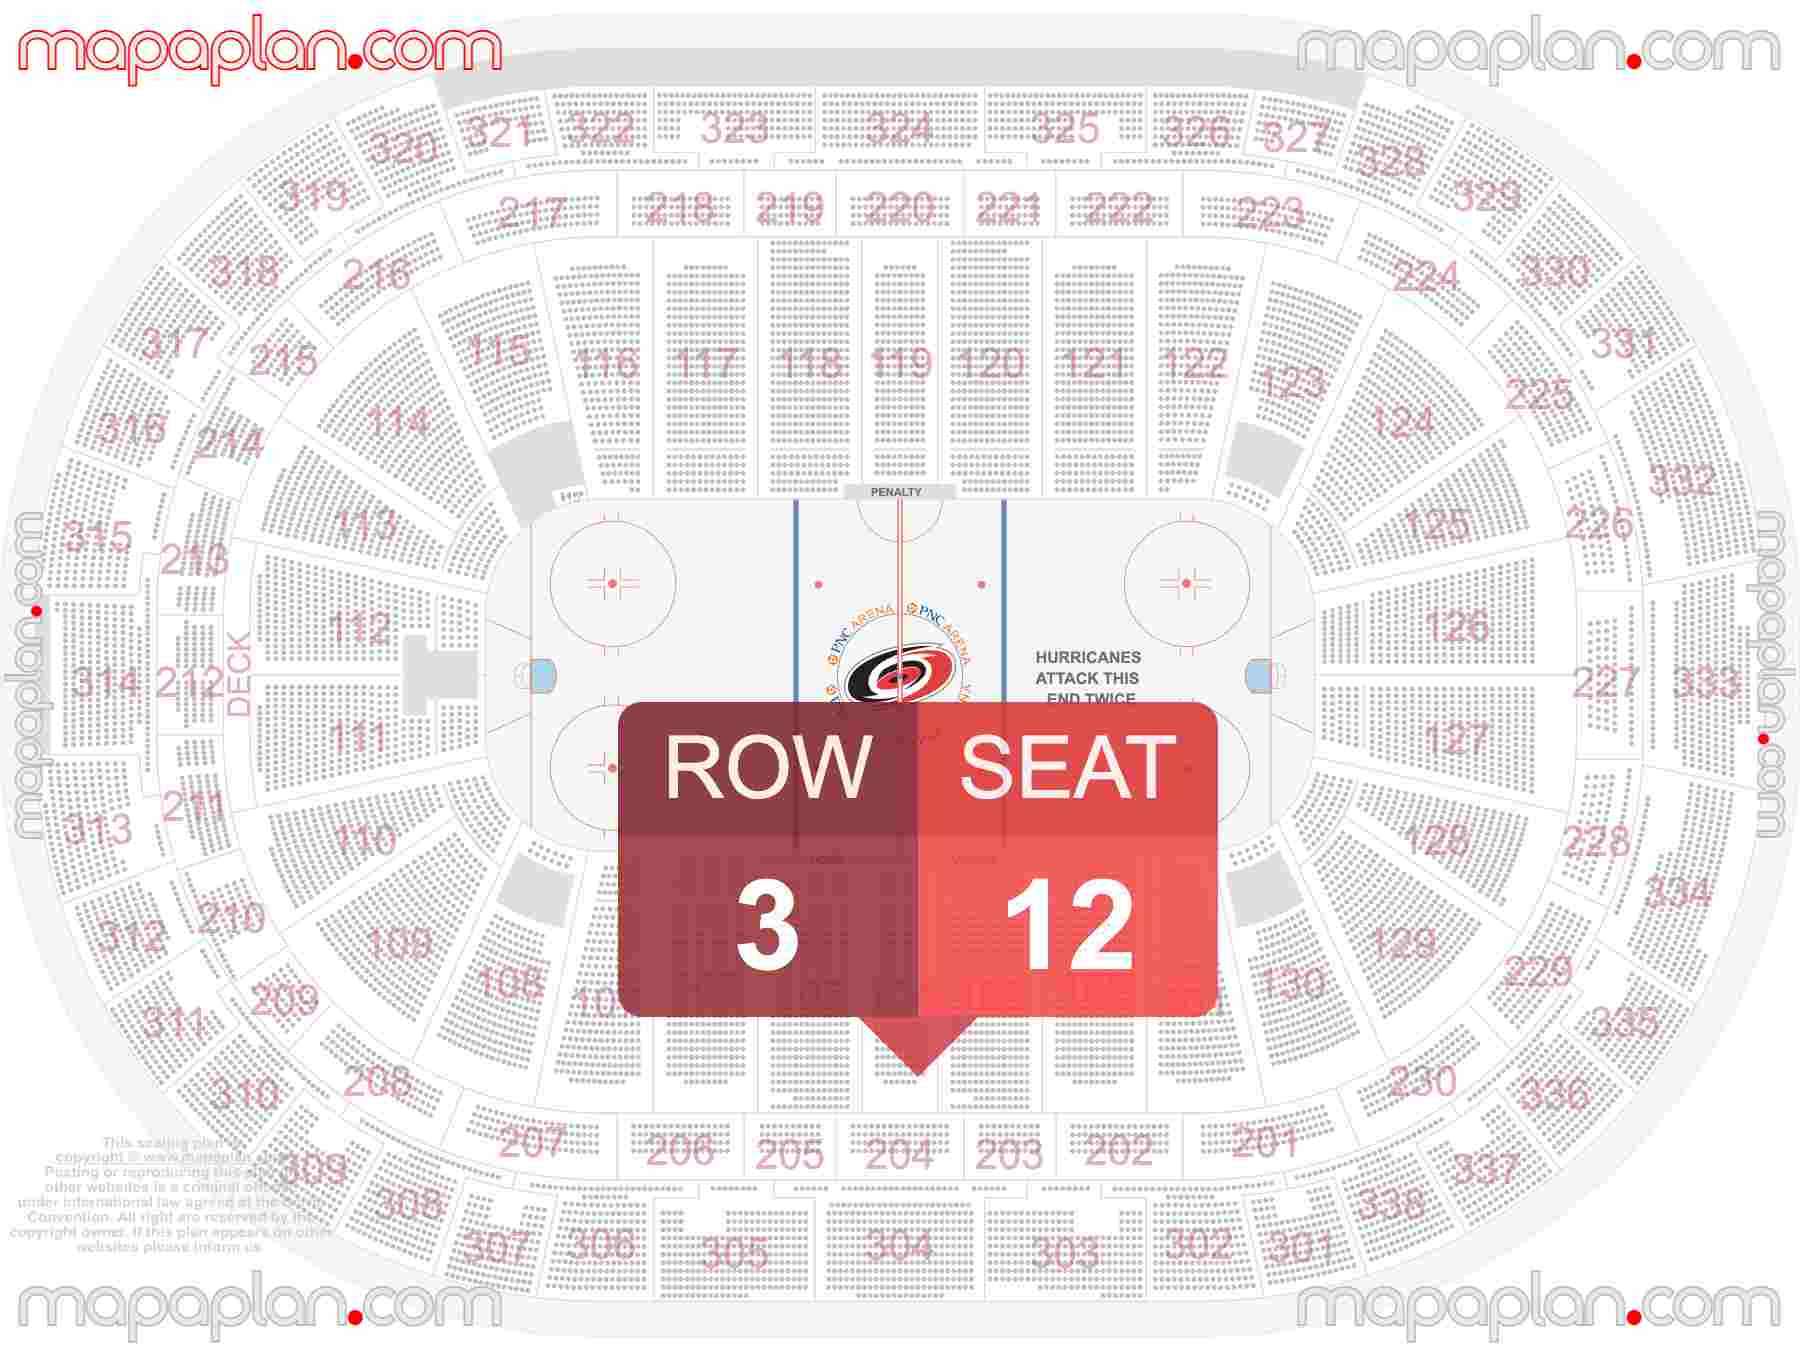 Raleigh PNC Arena seating chart Carolina Hurricanes hockey inside capacity view arrangement plan - Interactive virtual 3d best seats & rows detailed stadium image configuration layout